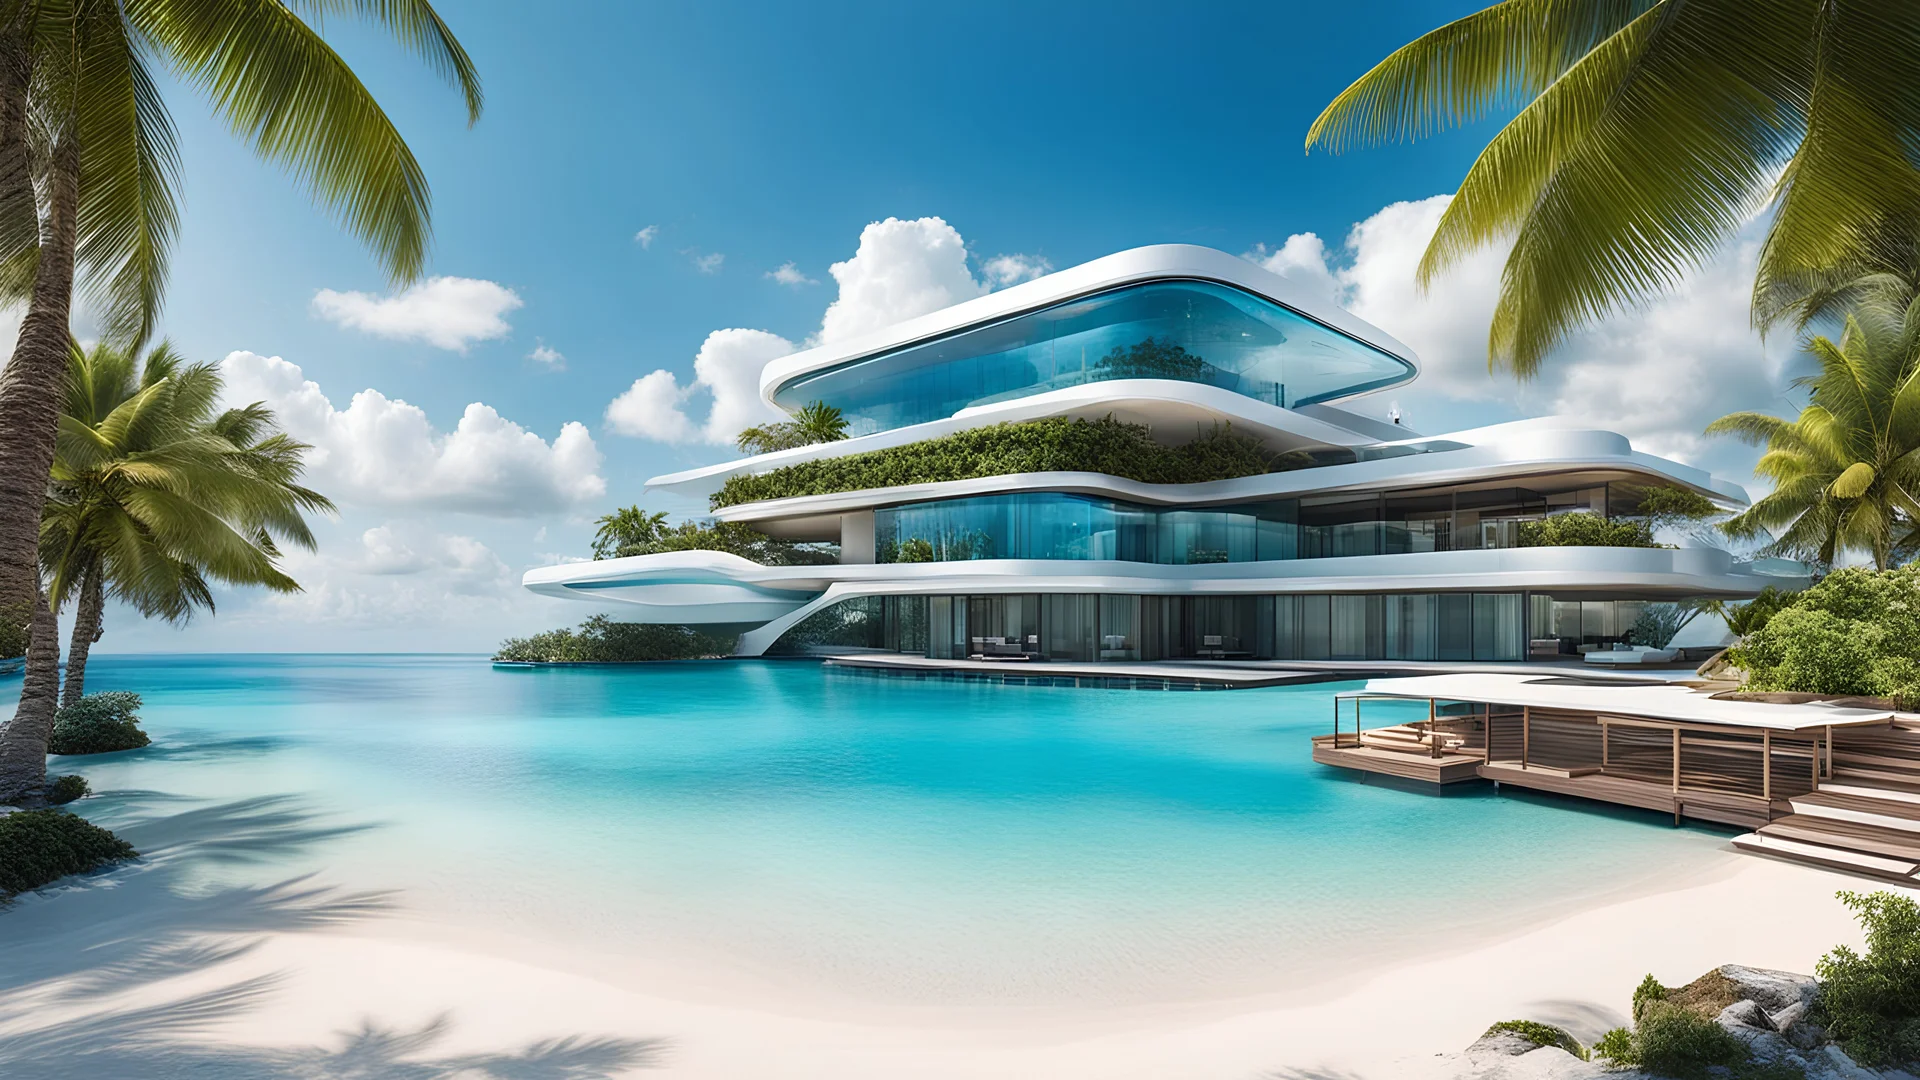 award winning cinematic landscape realistic photography of an image delightful summer day at the Maldives beach, futuristic modern sci-fi lodge